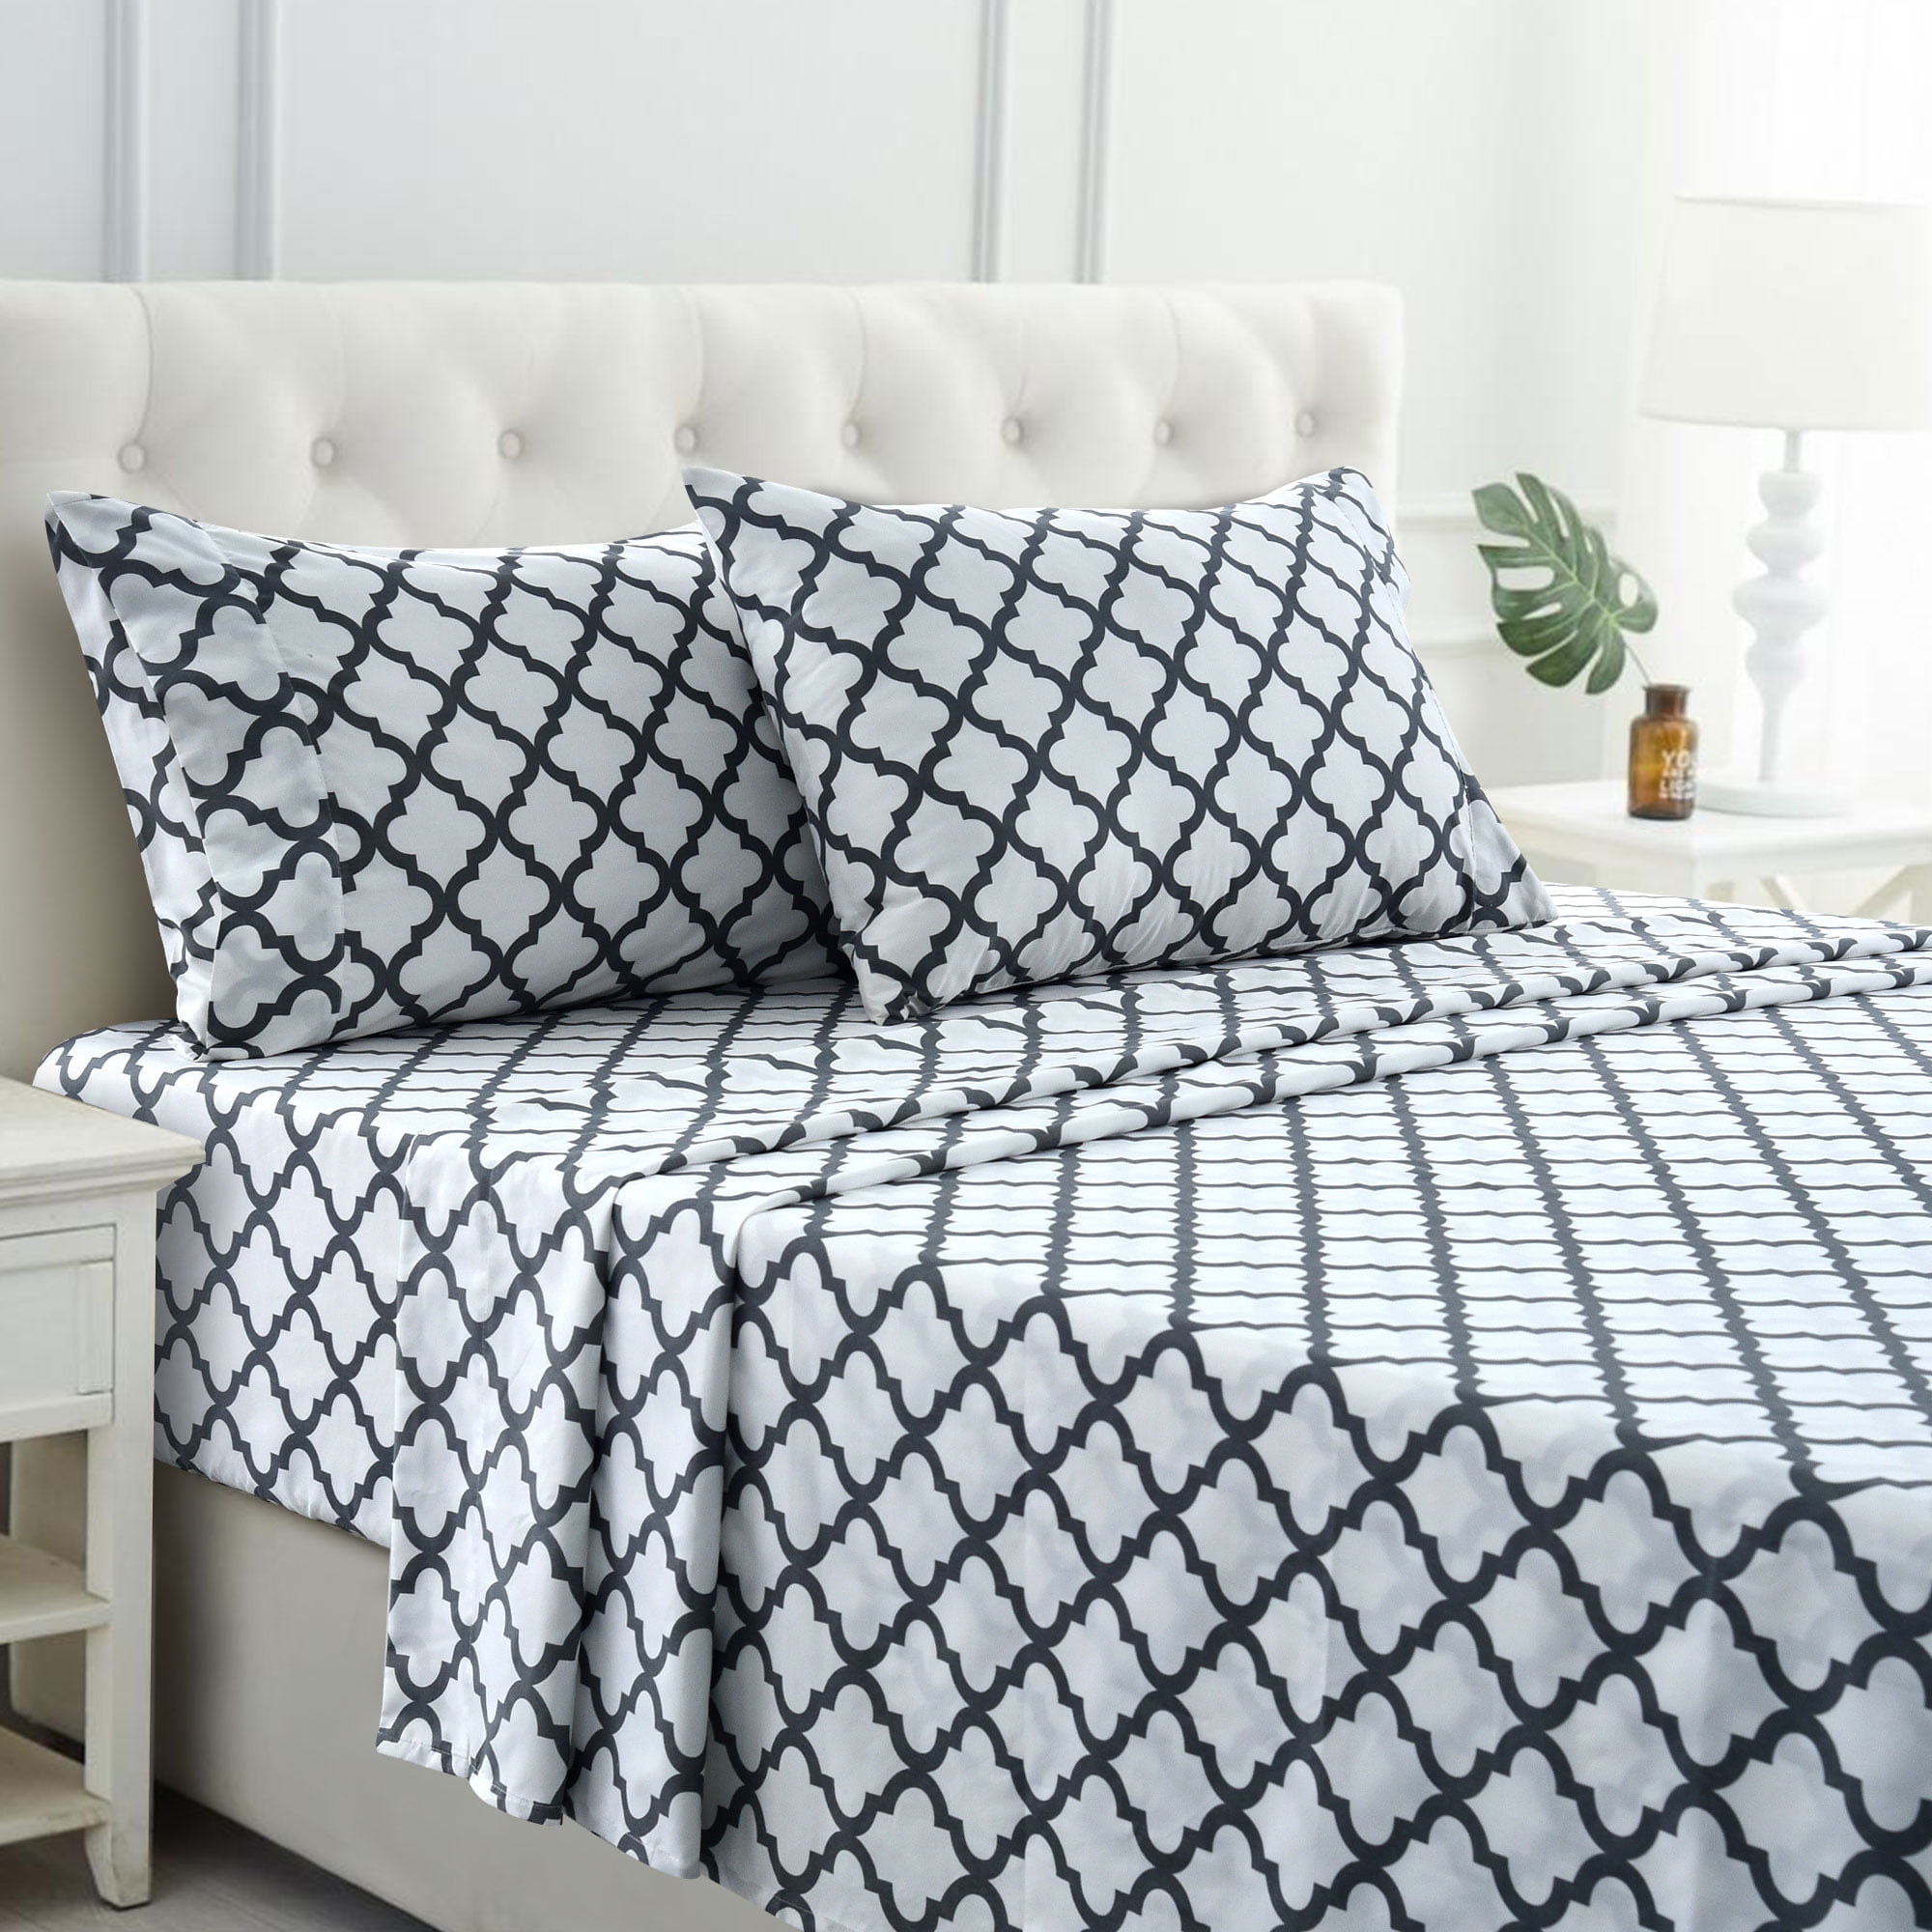 Lux Decor Collection King Sheets Set - 4 Pc Deep Pocket Bed Sheets Bedding Set & Pillowcases - White Gray - image 1 of 6